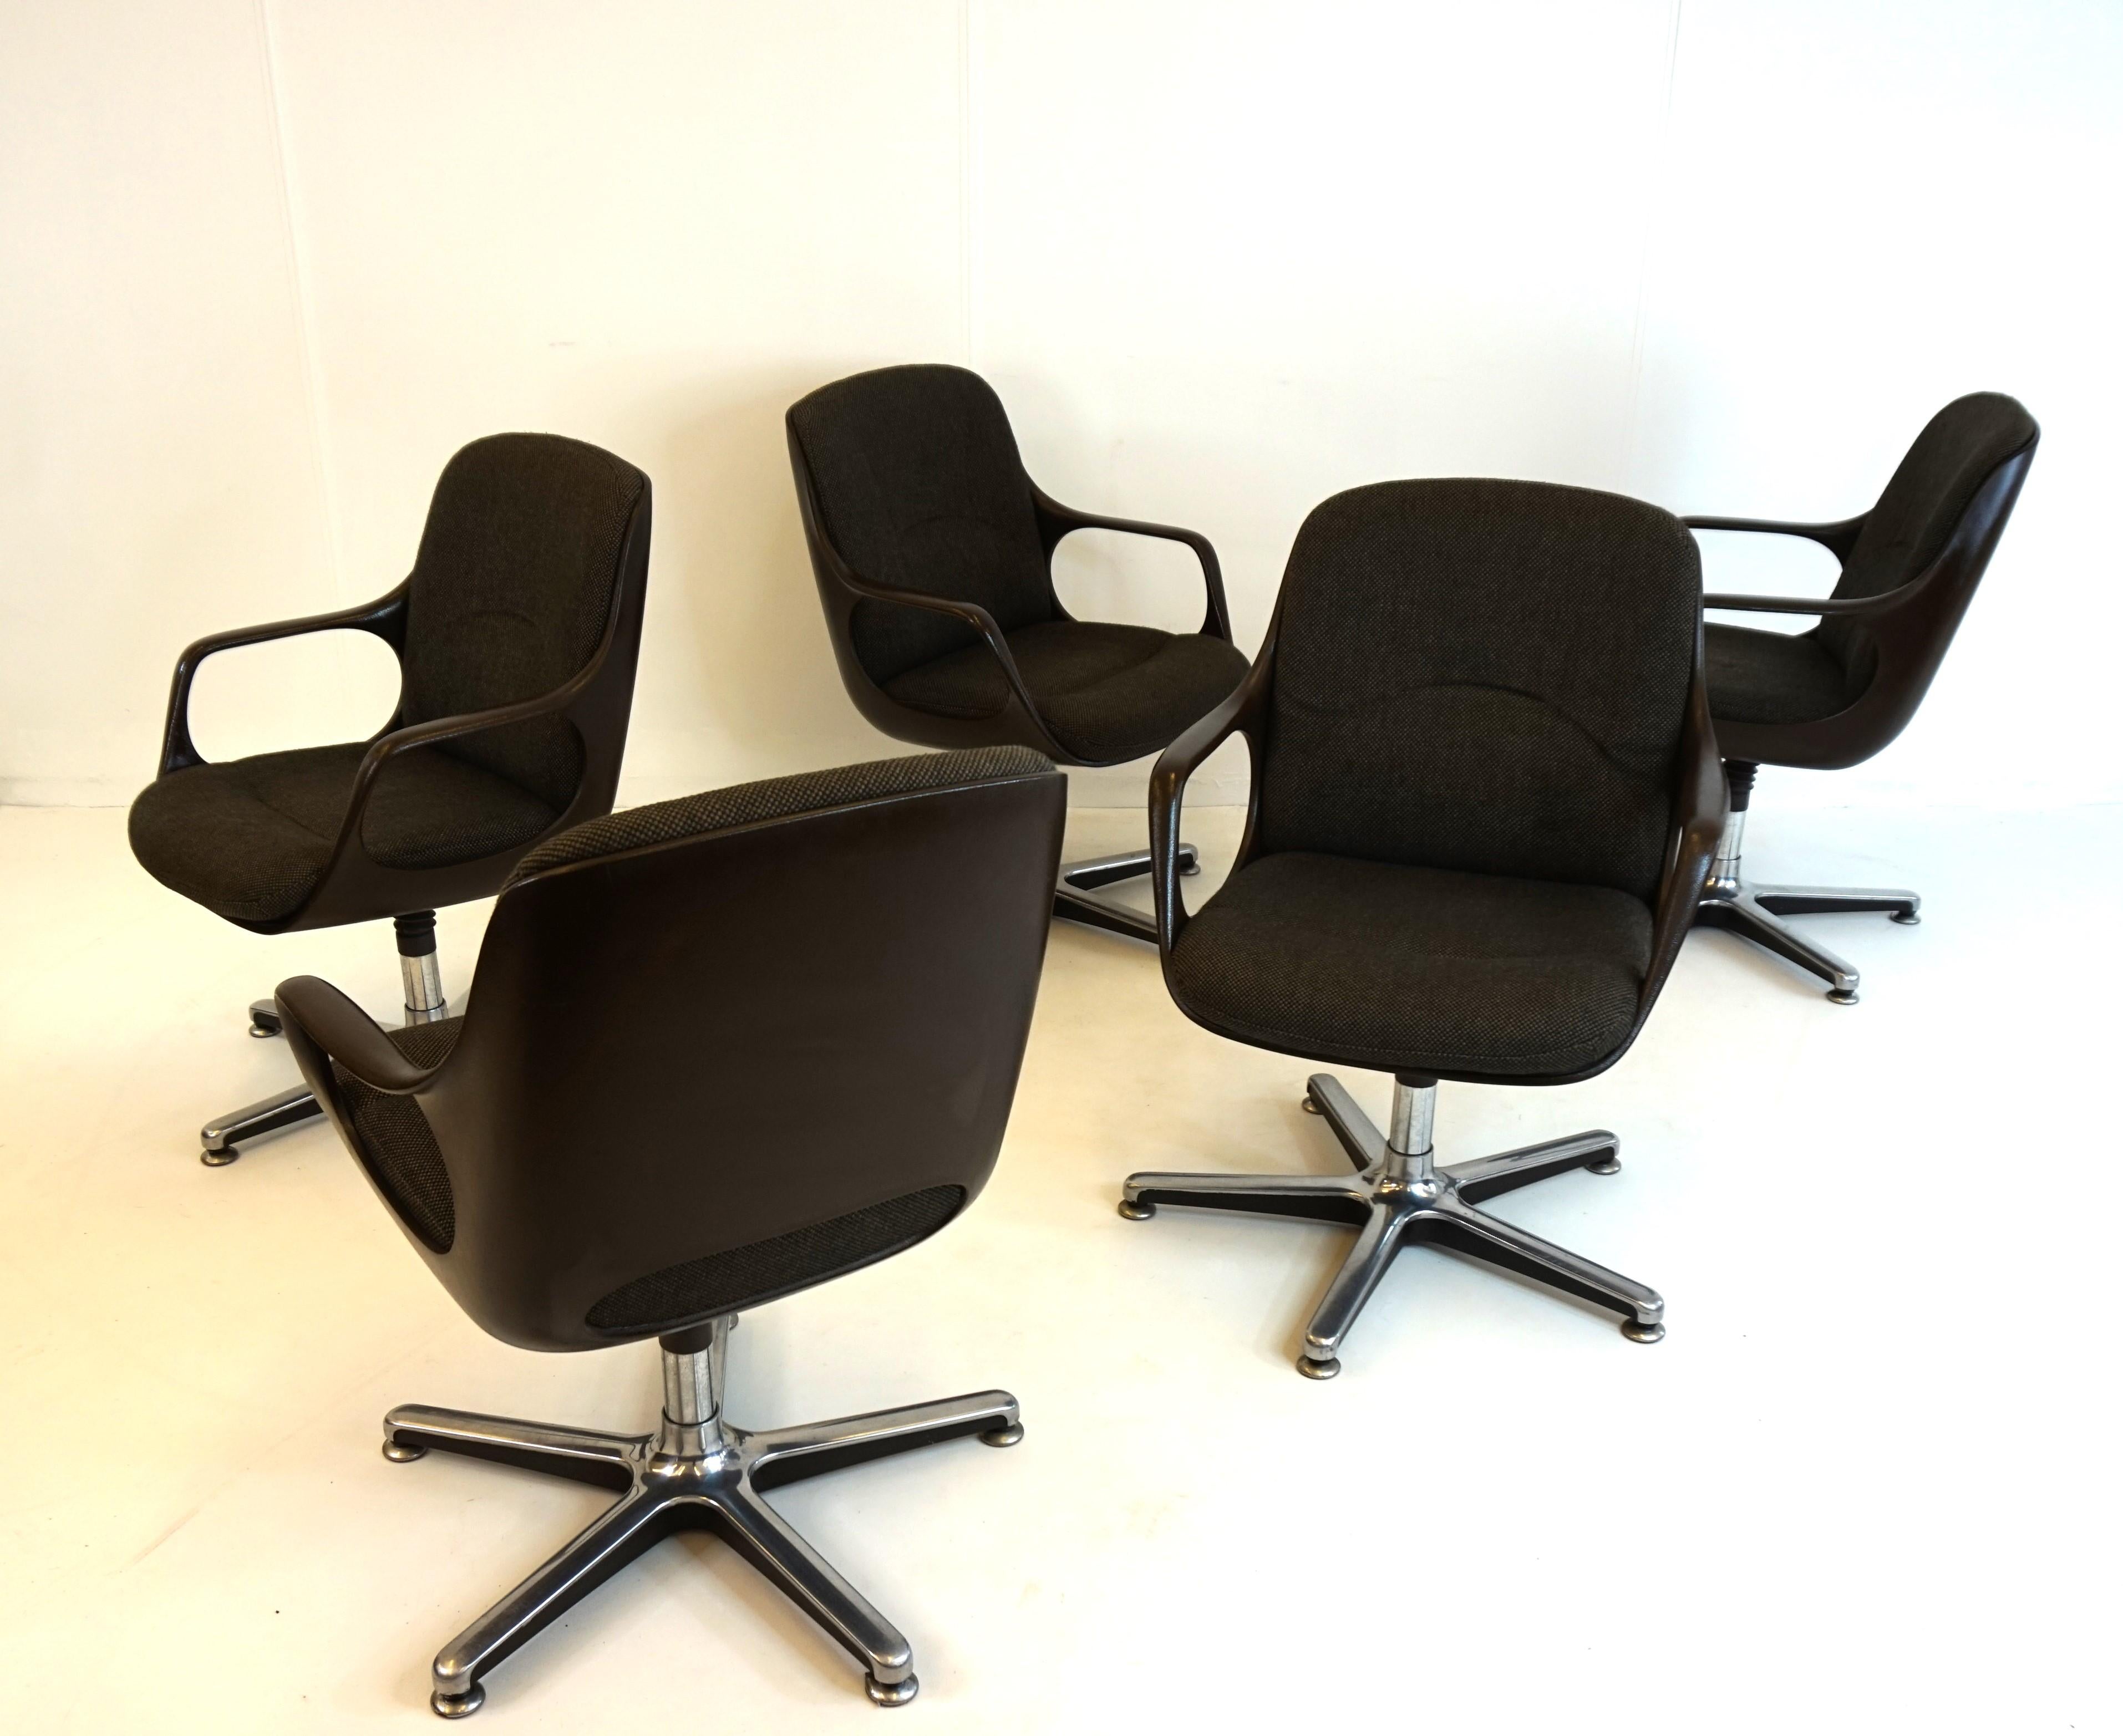 Chromcraft Set of 5 Space Age Office/Dining Room Chairs 5